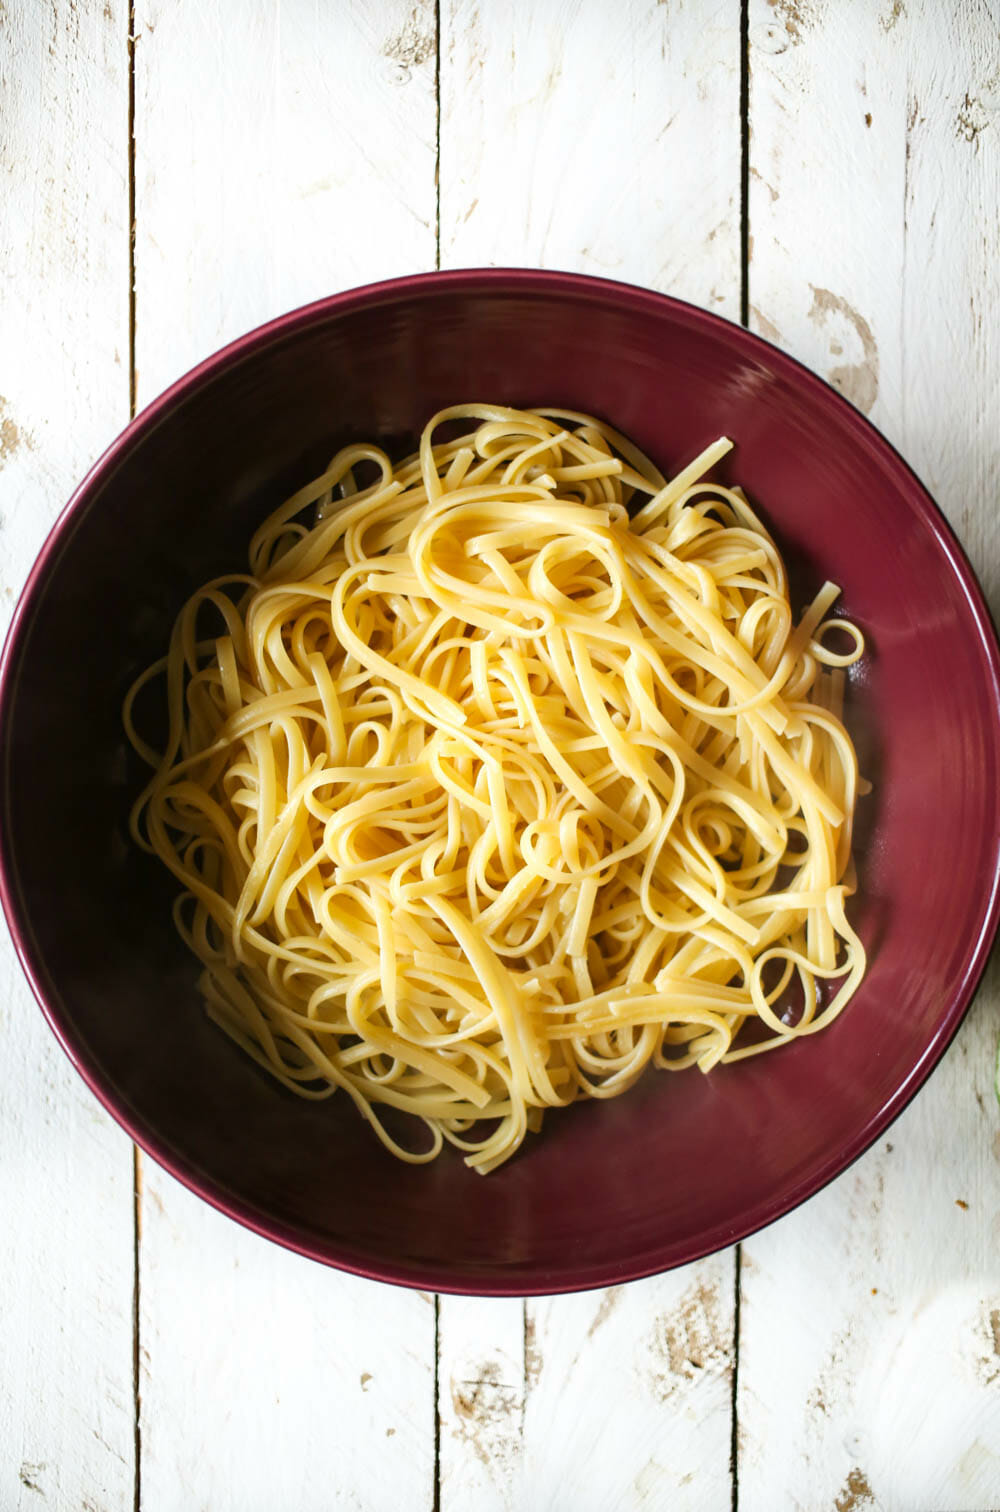 Cooked noodles in bowl